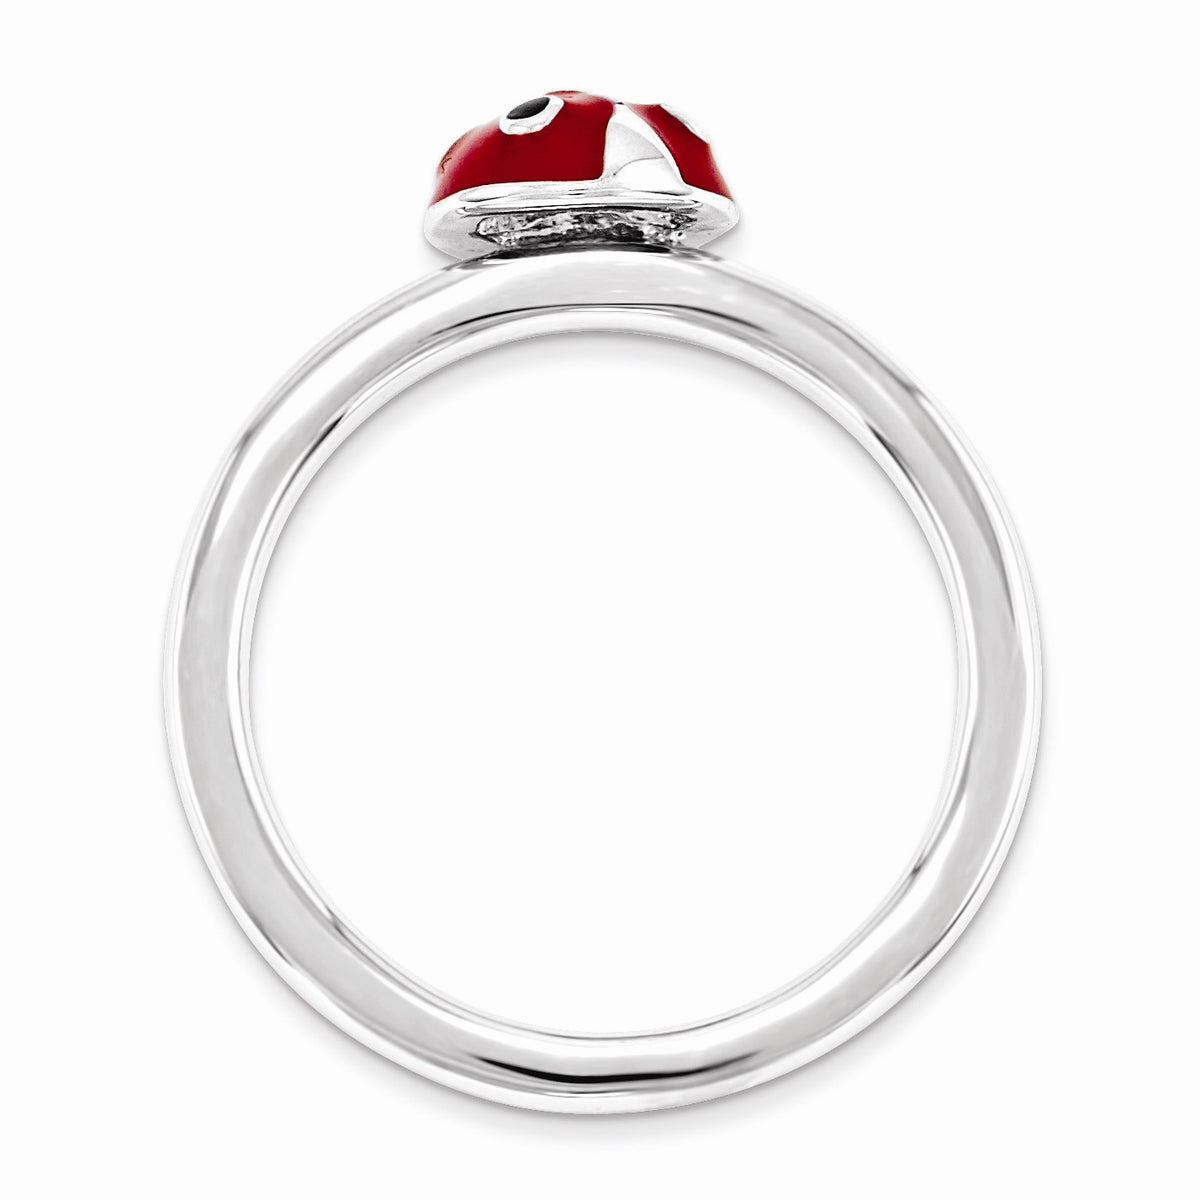 Alternate view of the Sterling Silver Stackable Red &amp; Black Enamel 8mm Ladybug Ring by The Black Bow Jewelry Co.